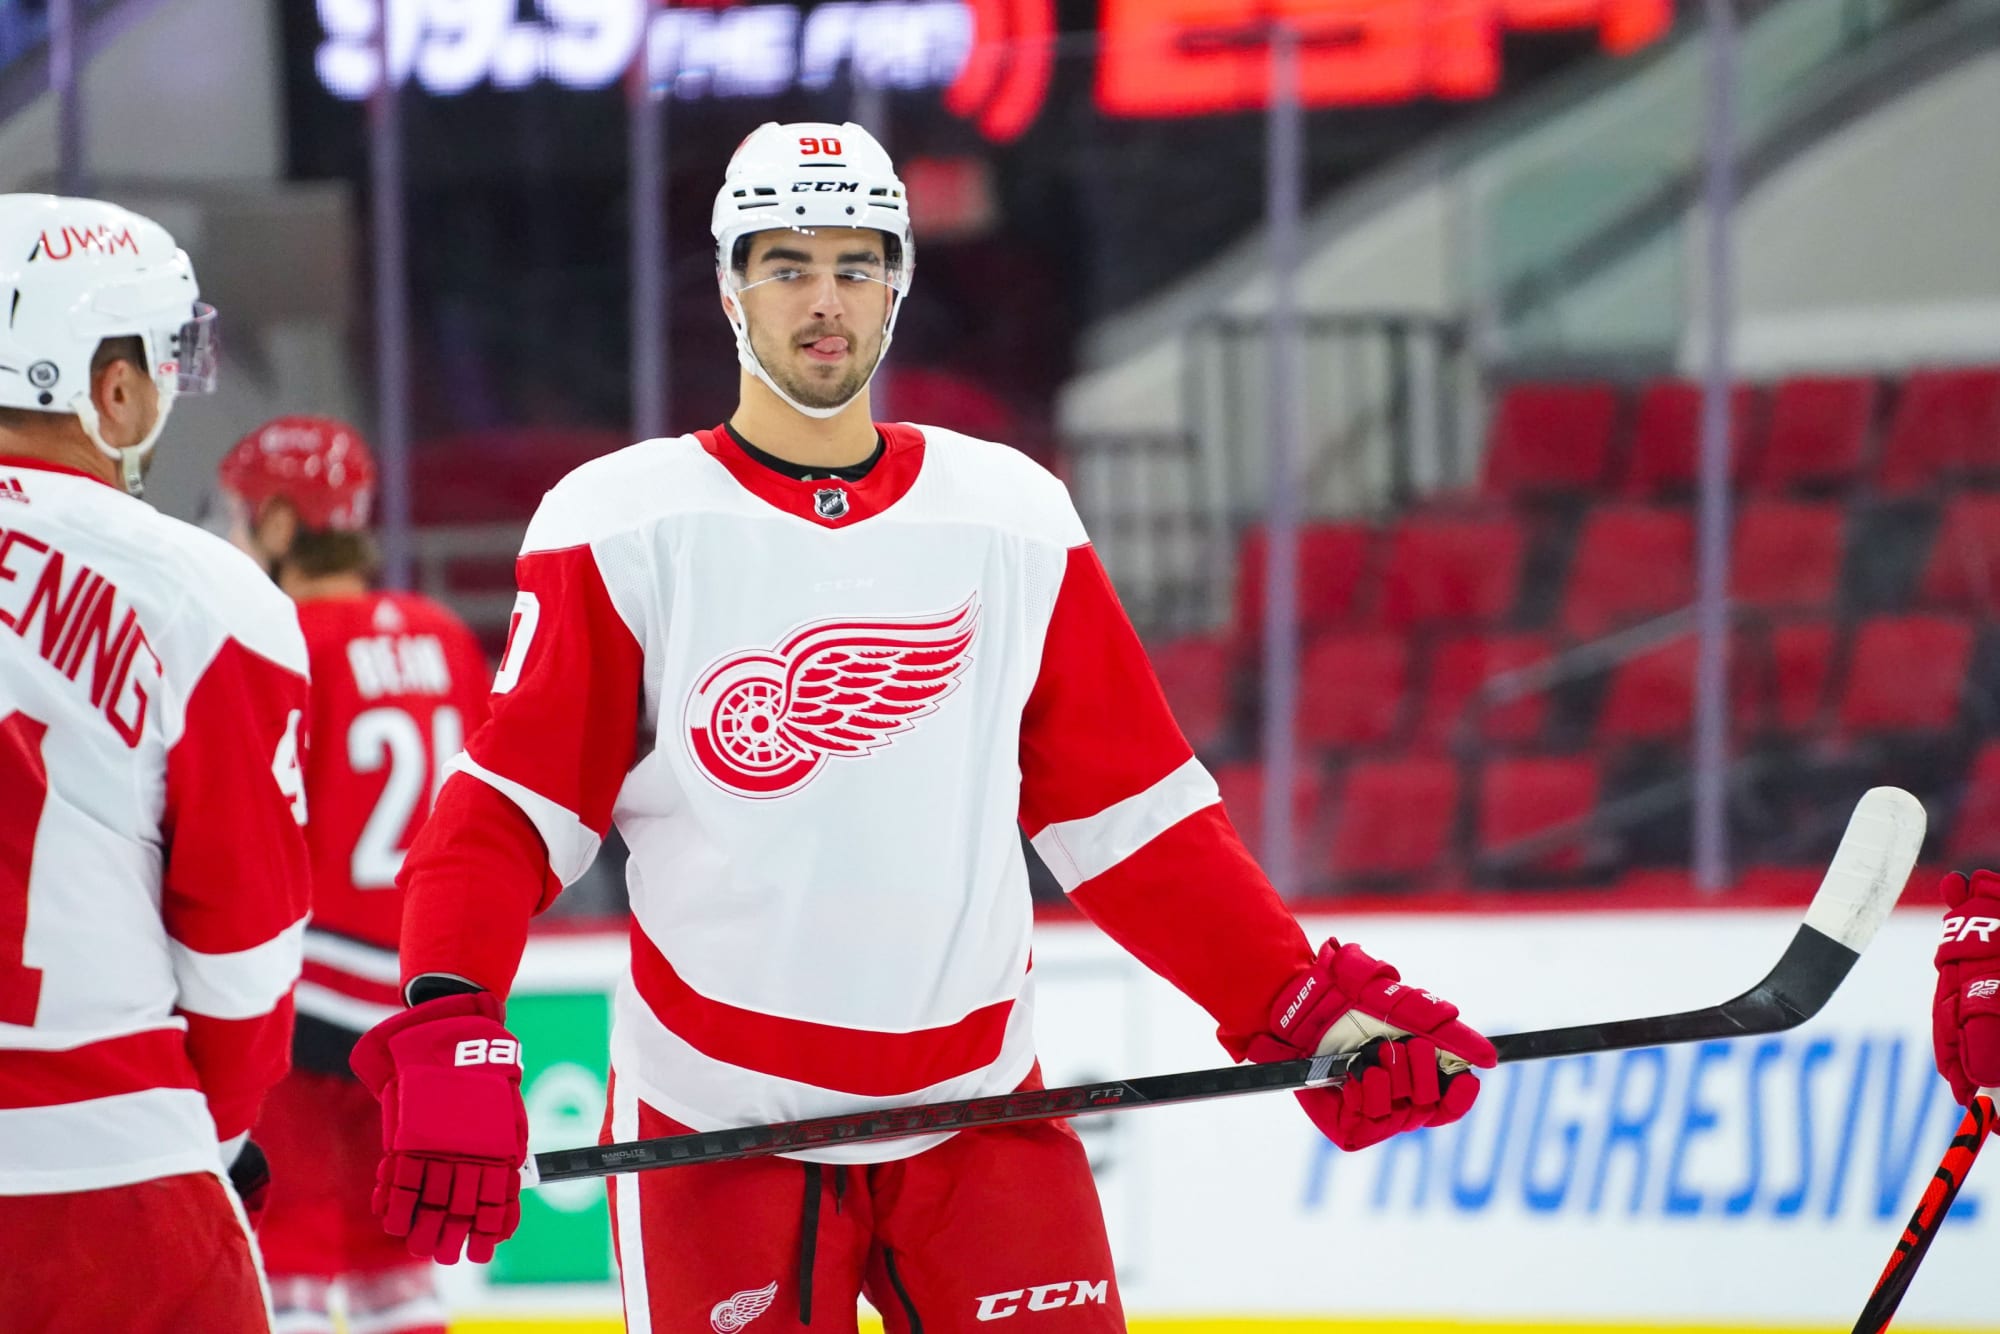 Detroit Red Wings prospects in Europe appear ready for NHL next year